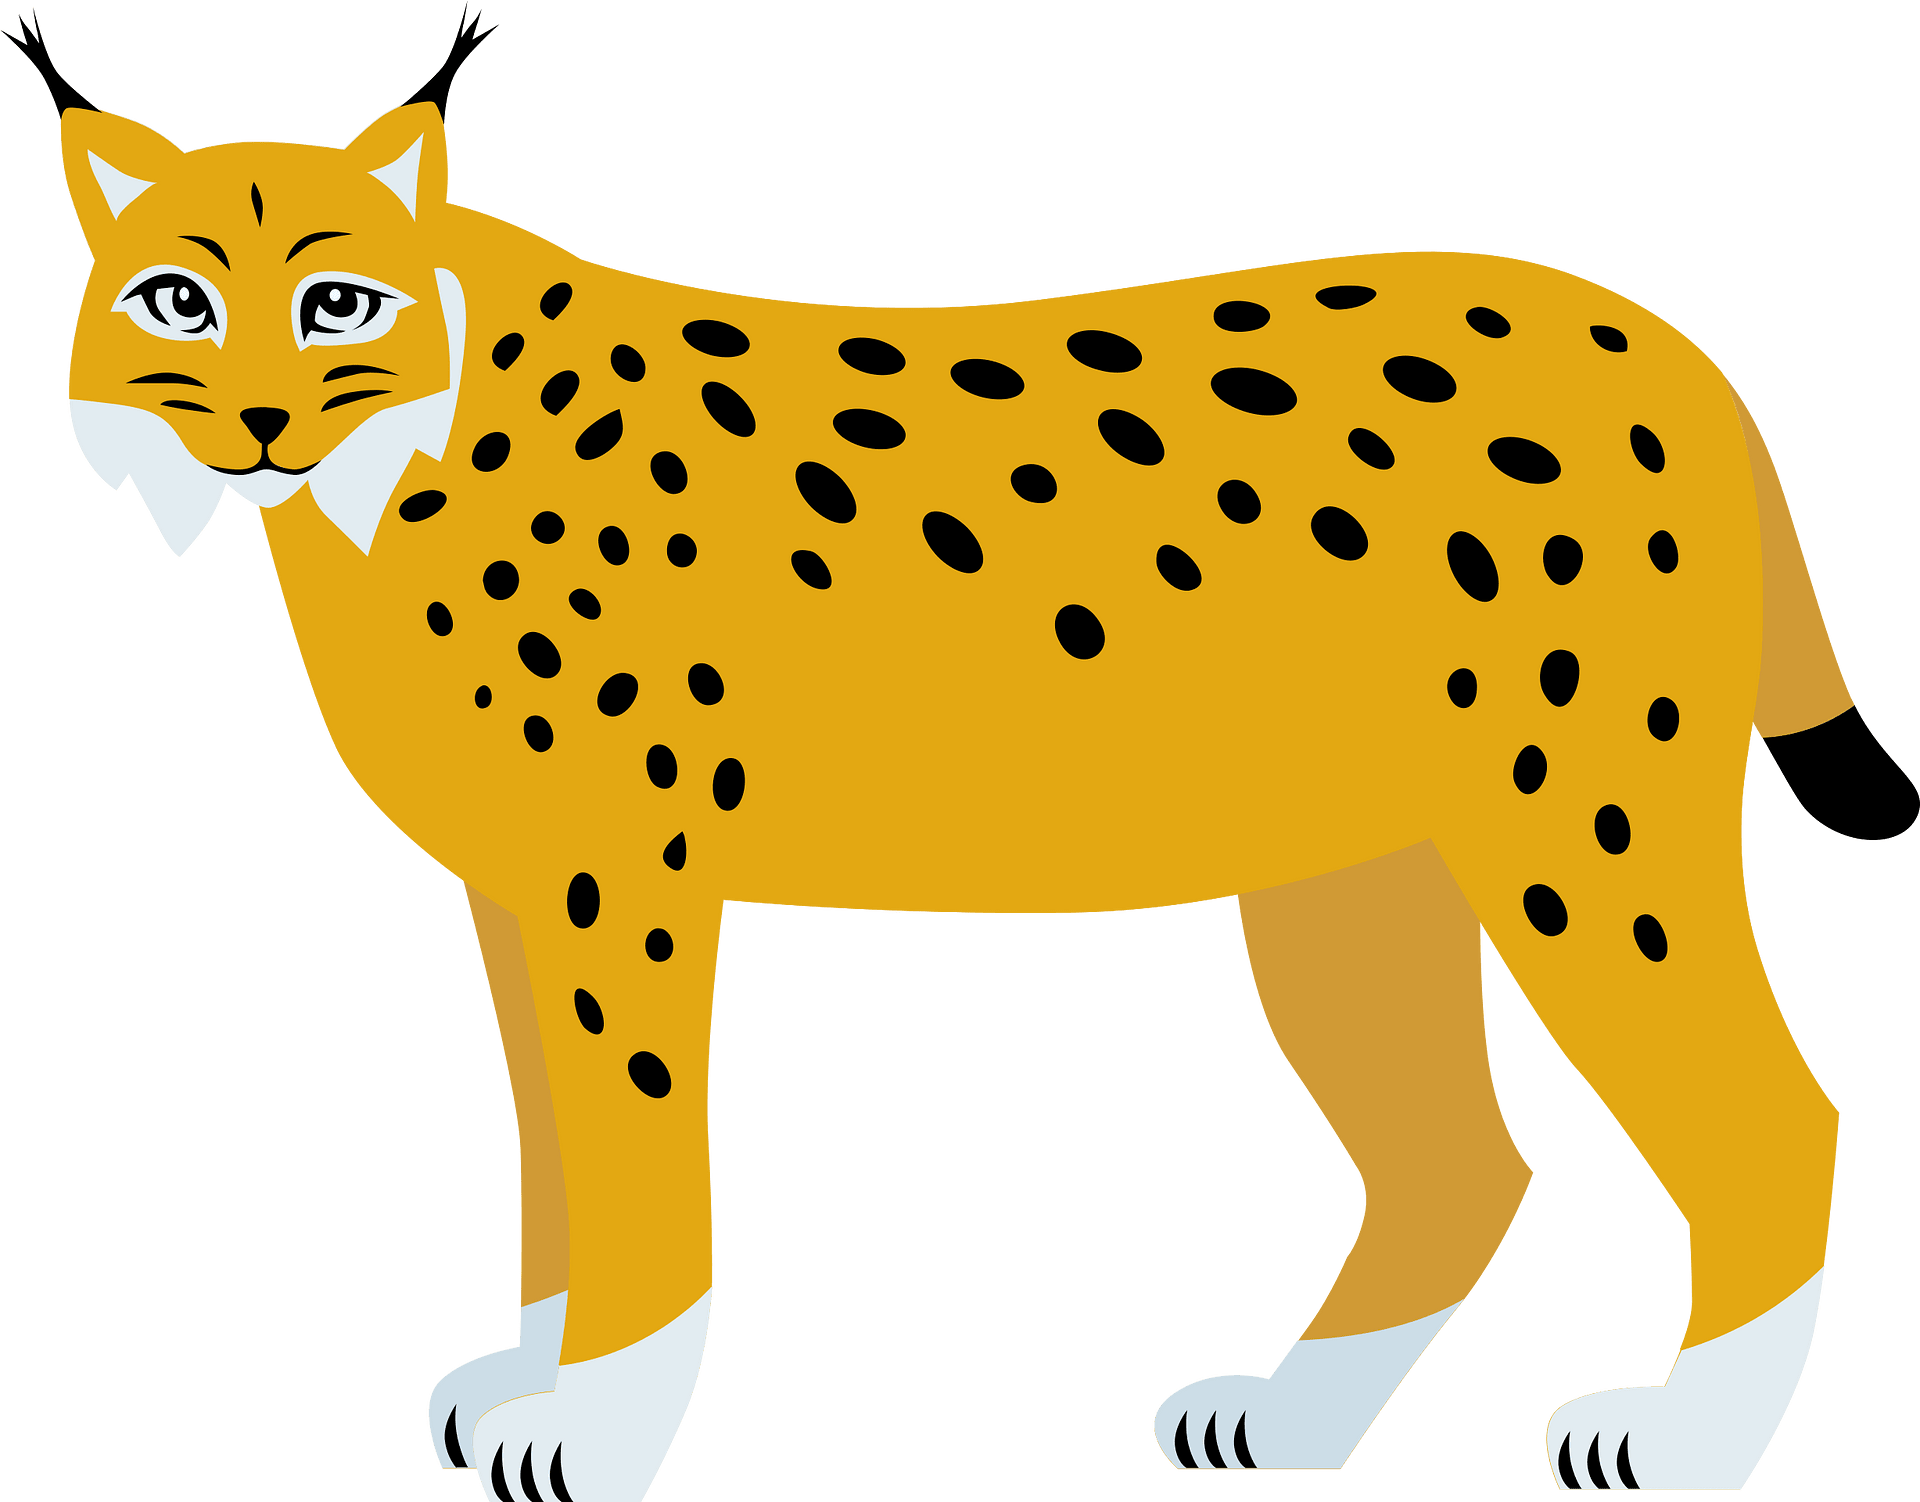 Bobcat clipart images and royalty-free illustrations | Clipart.com ...